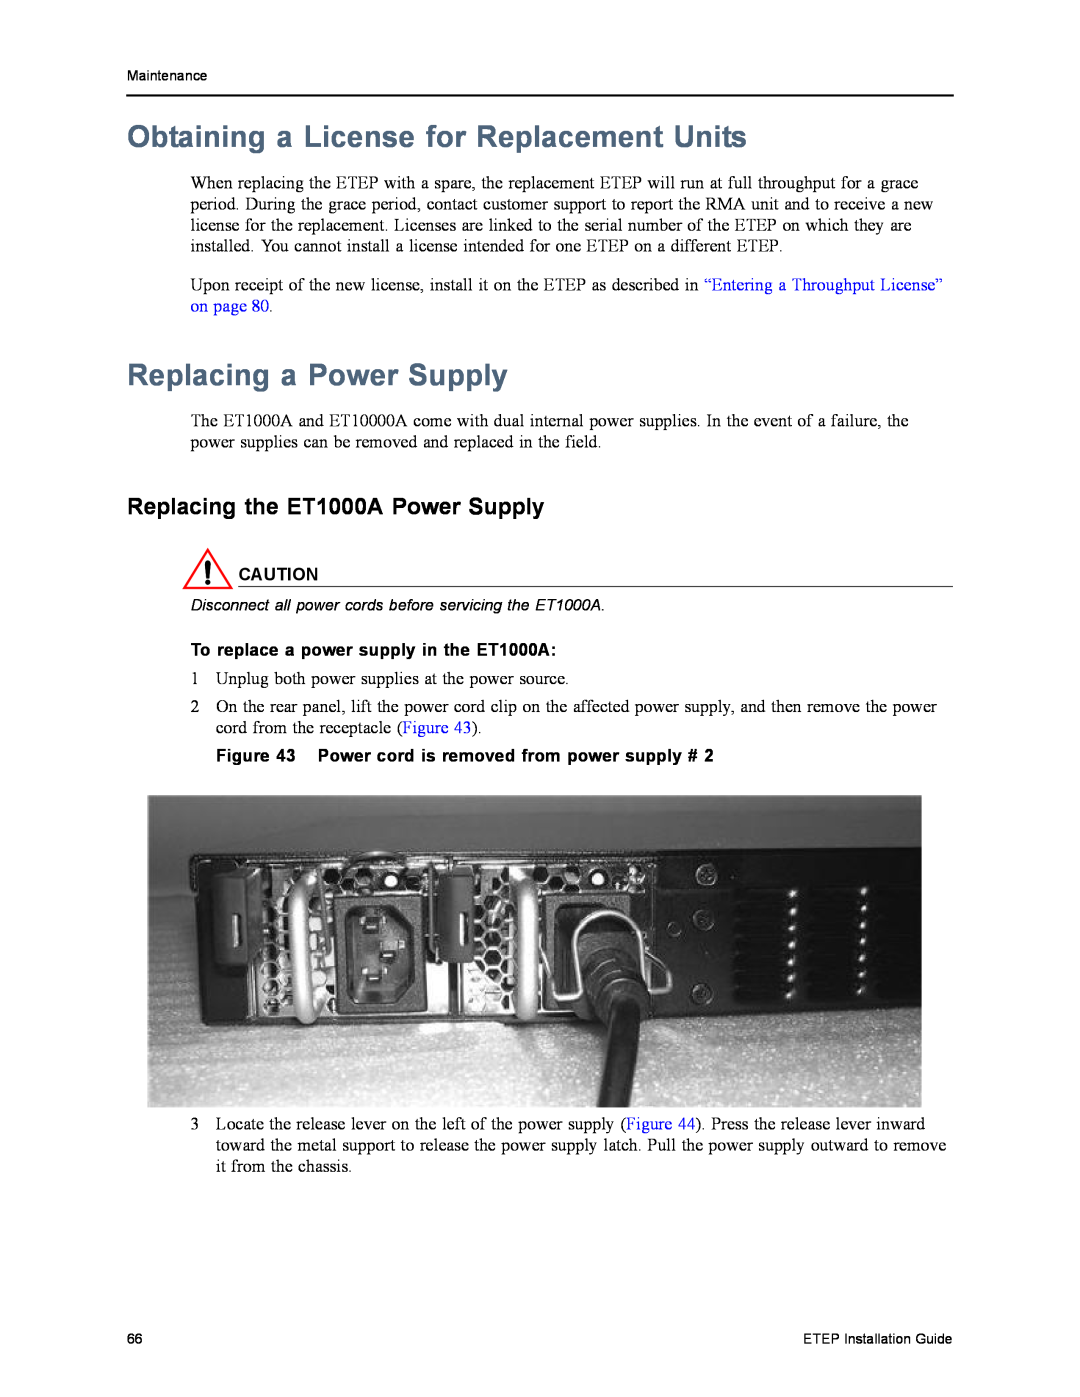 Black Box ET0010A Obtaining a License for Replacement Units, Replacing a Power Supply, Replacing the ET1000A Power Supply 